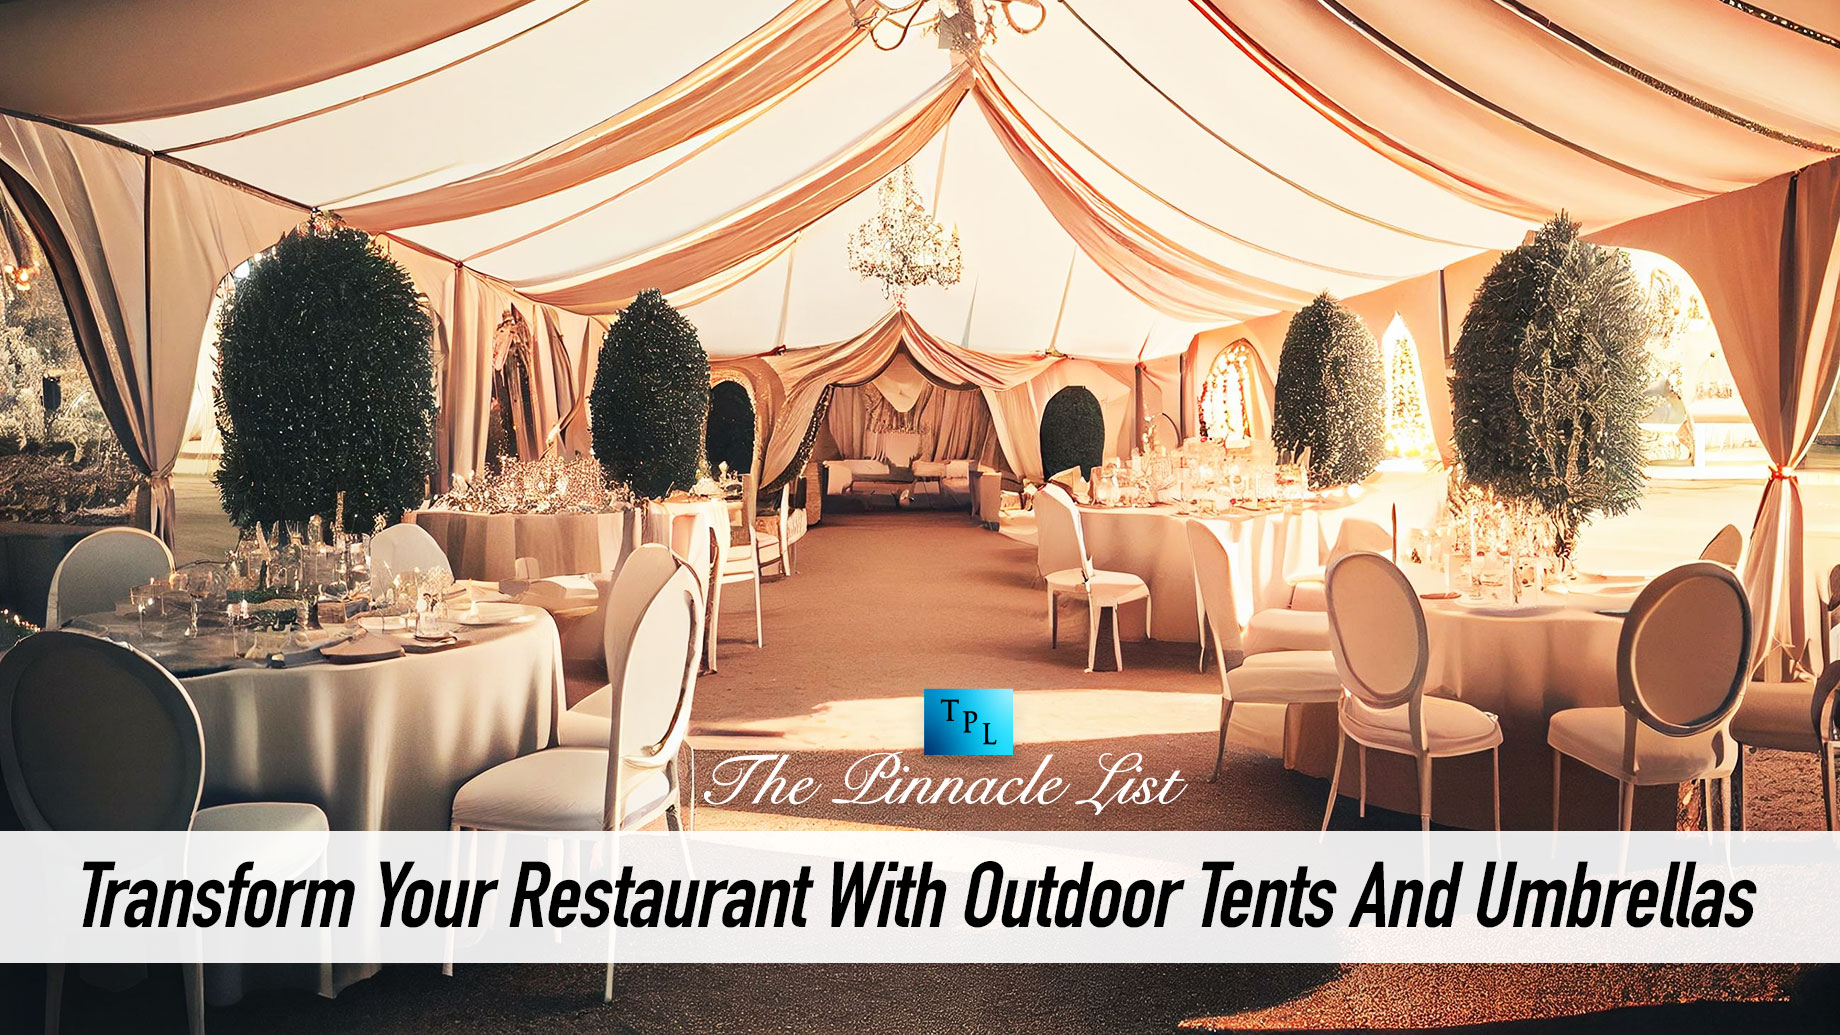 Transform Your Restaurant With Outdoor Tents And Umbrellas